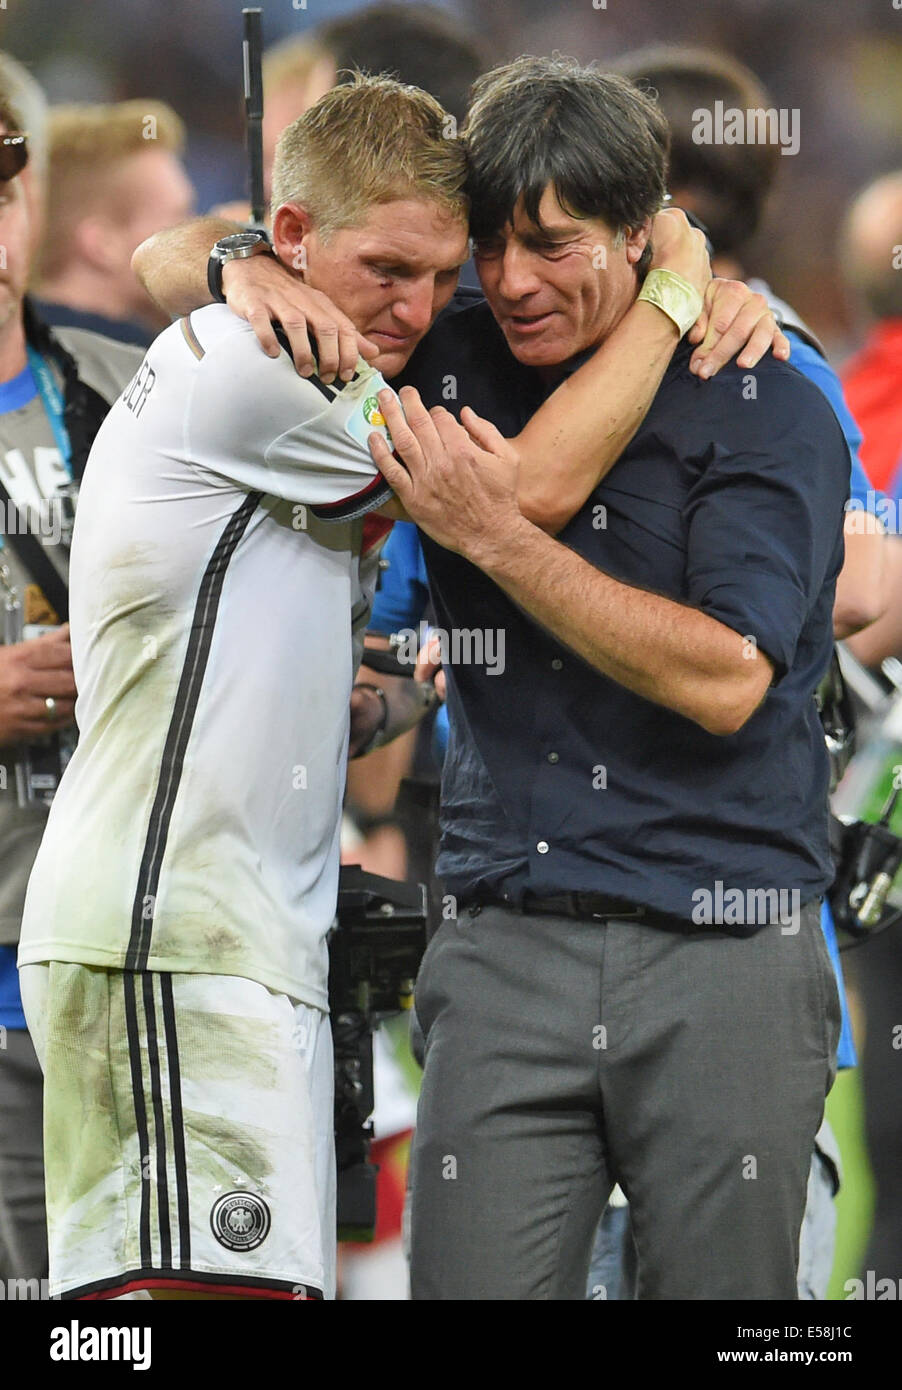 Rio de Janeiro, Brazil. 13th July, 2014. Bastian Schweinsteiger (L) of Germany celebrates with head coach Joachim Loew after winning the FIFA World Cup 2014 final soccer match between Germany and Argentina at the Estadio do Maracana in Rio de Janeiro, Brazil, 13 July 2014. © Action Plus Sports/Alamy Live News Stock Photo